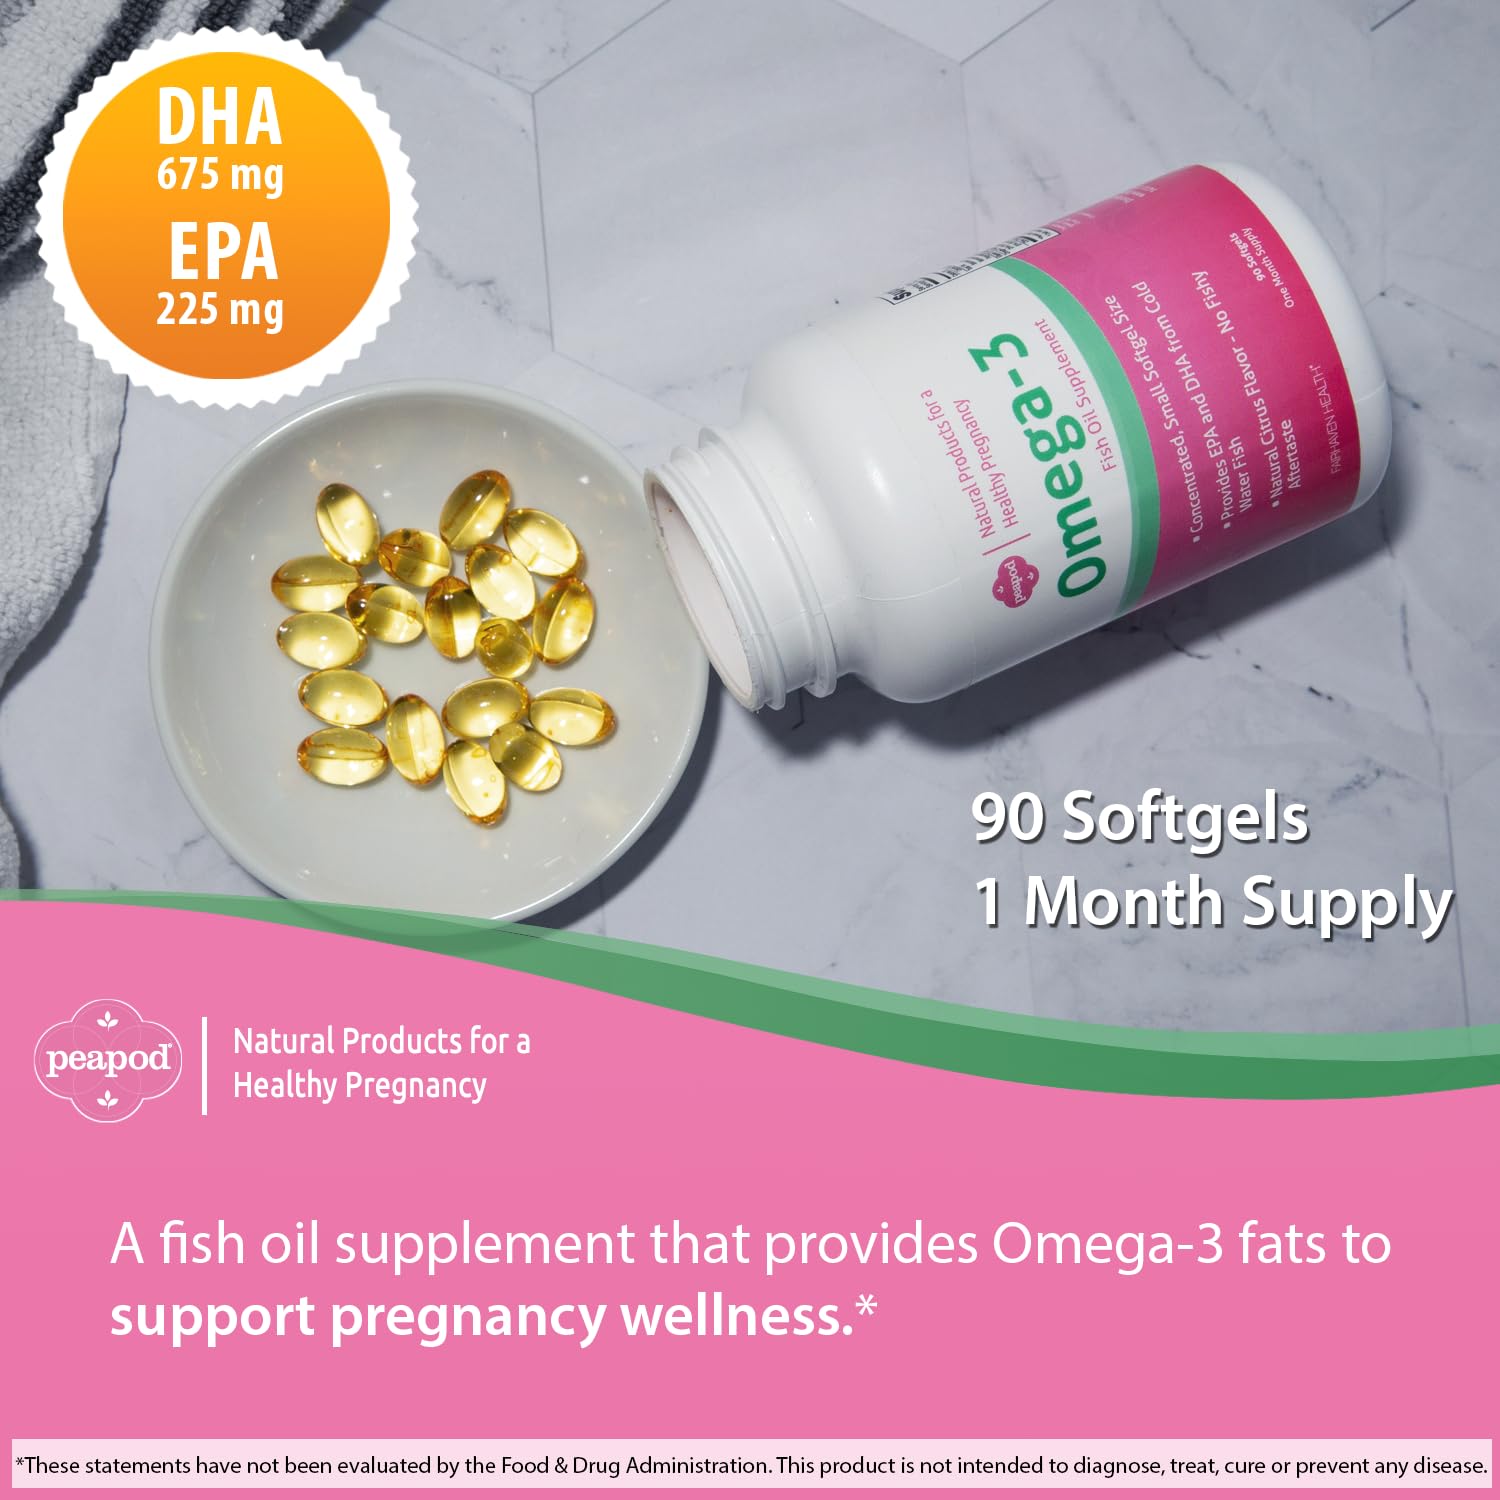 Fairhaven Health PeaPod Omega-3 Premium Icelandic Fish Oil Supplement for Healthy Pregnancy, Made with EPA, DHA and Fatty Acids for Cognitive Function, Citrus Flavor